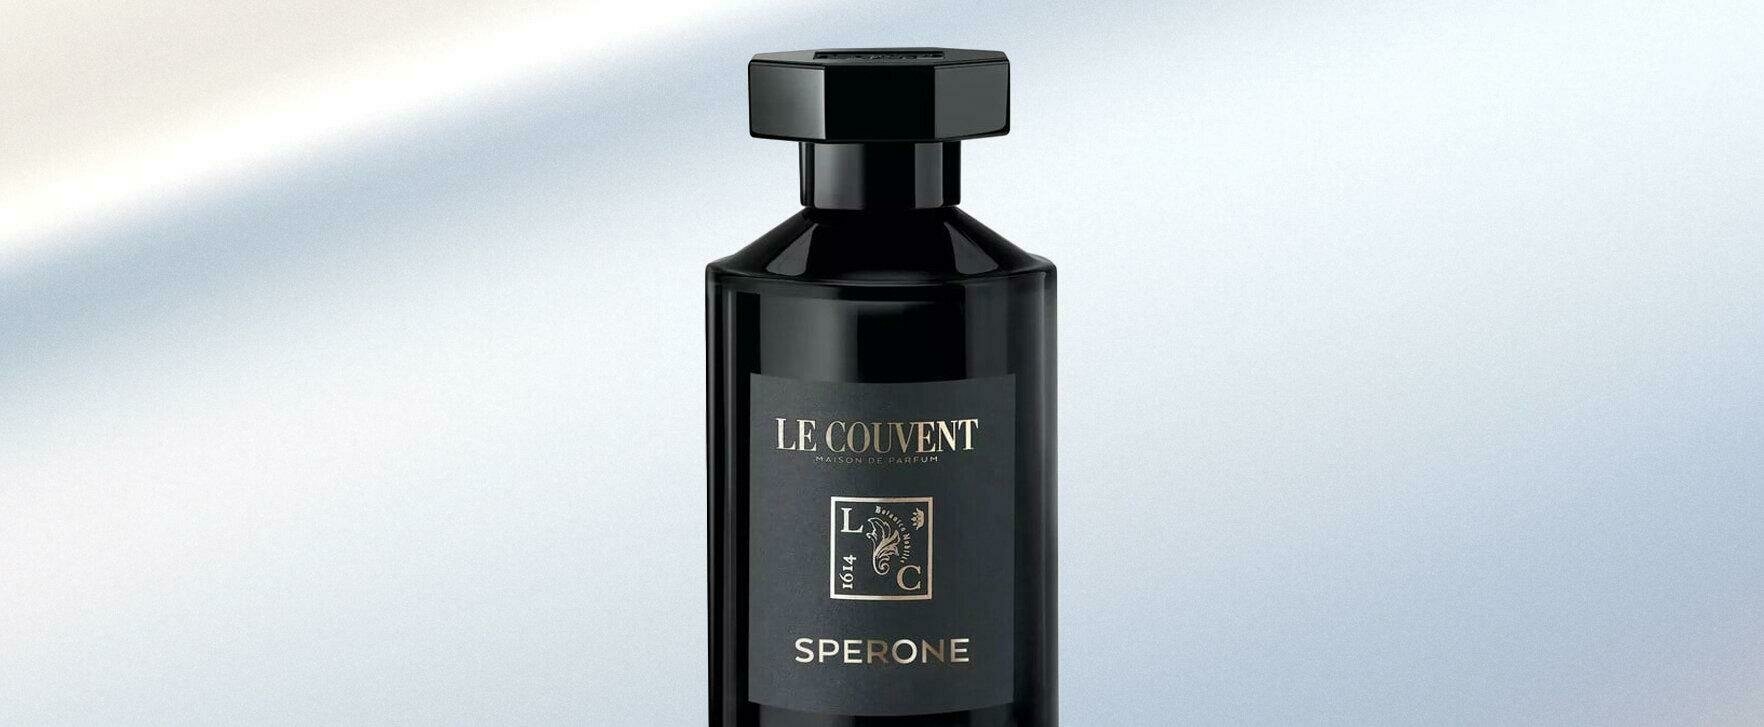 An Ode to the Sweet Life on the Mediterranean: "Sperone" by Le Couvent